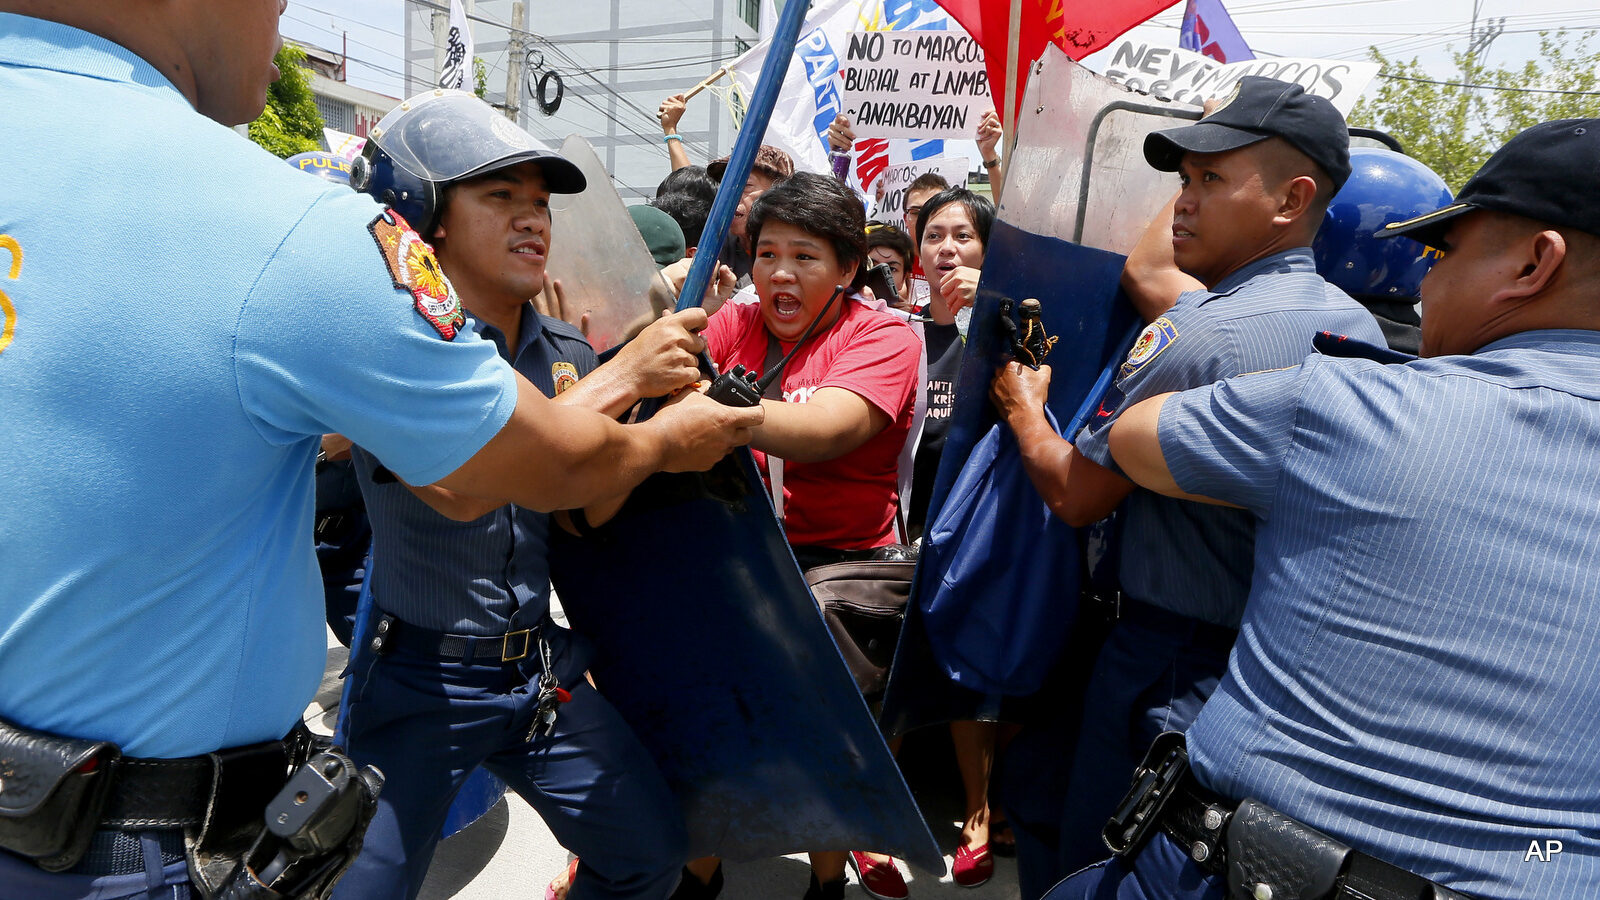 Police scuffle with protesters forcing their way towards the gates of the Heroes Cemetery to oppose next month's burial of the late Philippine dictator Ferdinand Marcos at the cemetery, Thursday, Aug. 18, 2016, in suburban Taguig city east of Manila, Philippines. Various civic and anti-Marcos groups have revived their protests after President Rodrigo Duterte ordered Marcos' burial with full military honors.